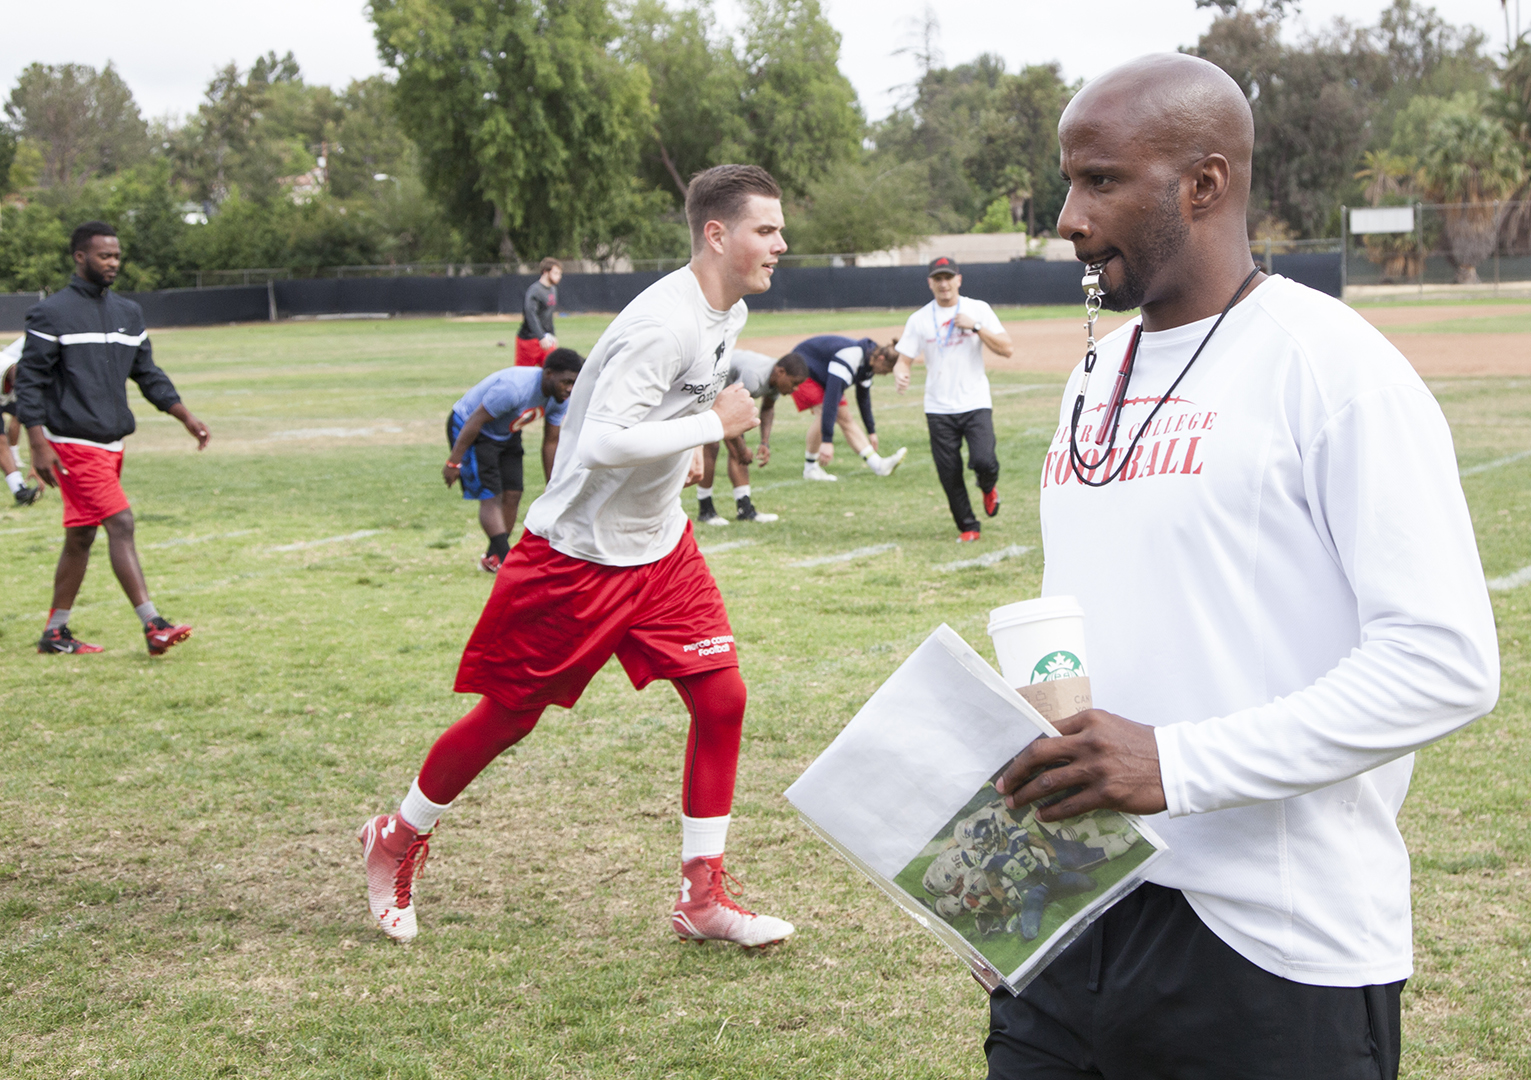  Defensive coordinator Torry Hughes leads the Pierce College football team in warm up drills during a spring practice and training session on Thursday, May 14, 2015. Woodland Hills, Calif. 